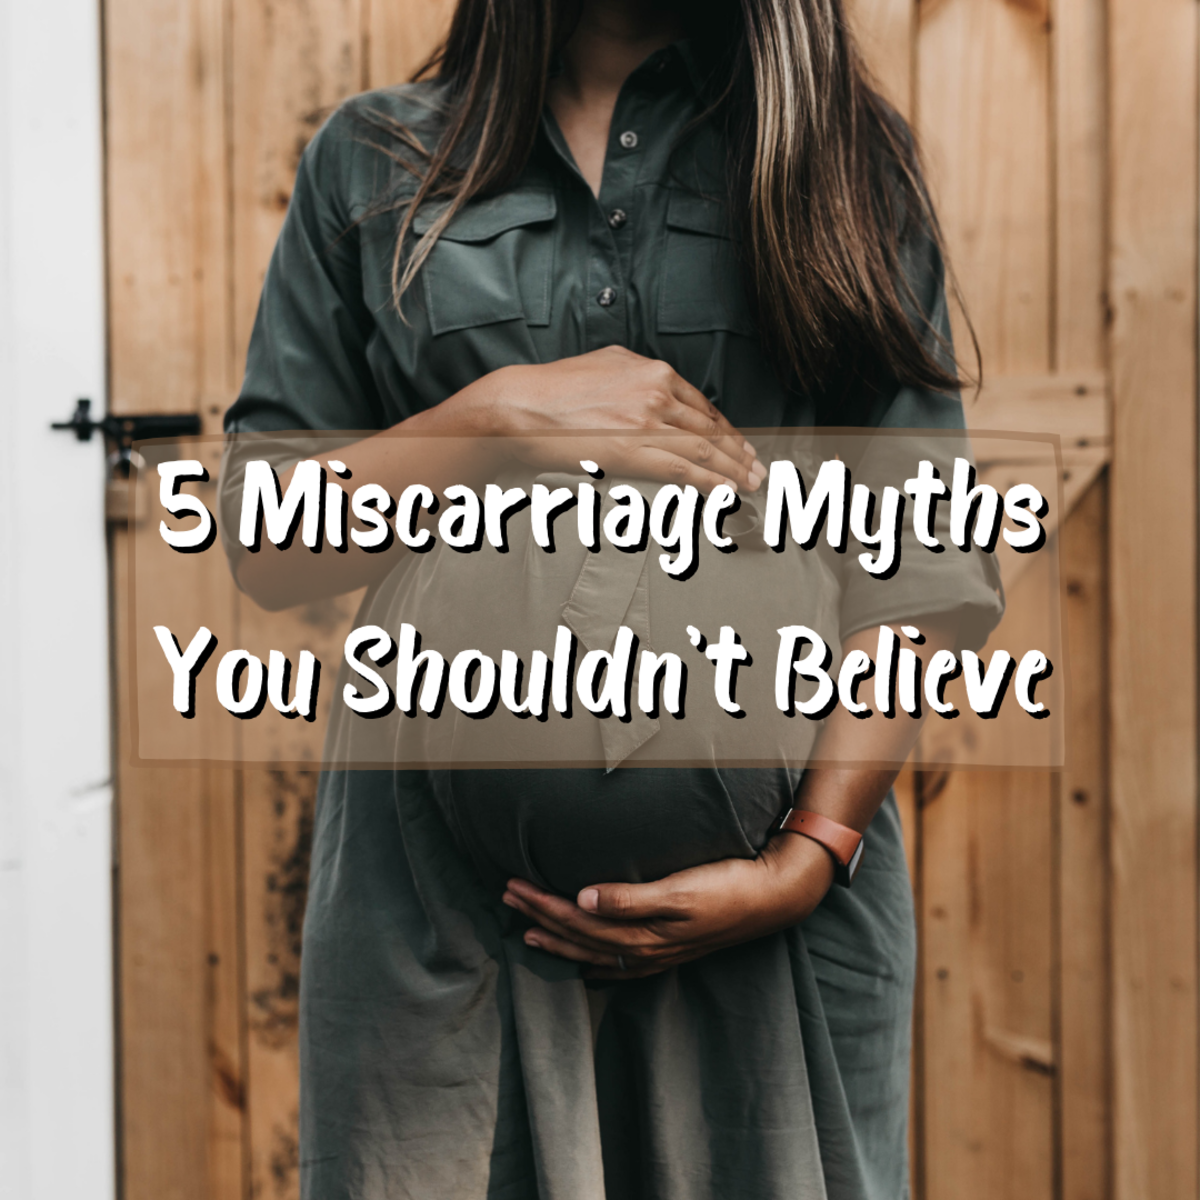 5 Miscarriage Myths Expecting Mothers Should Stop Believing